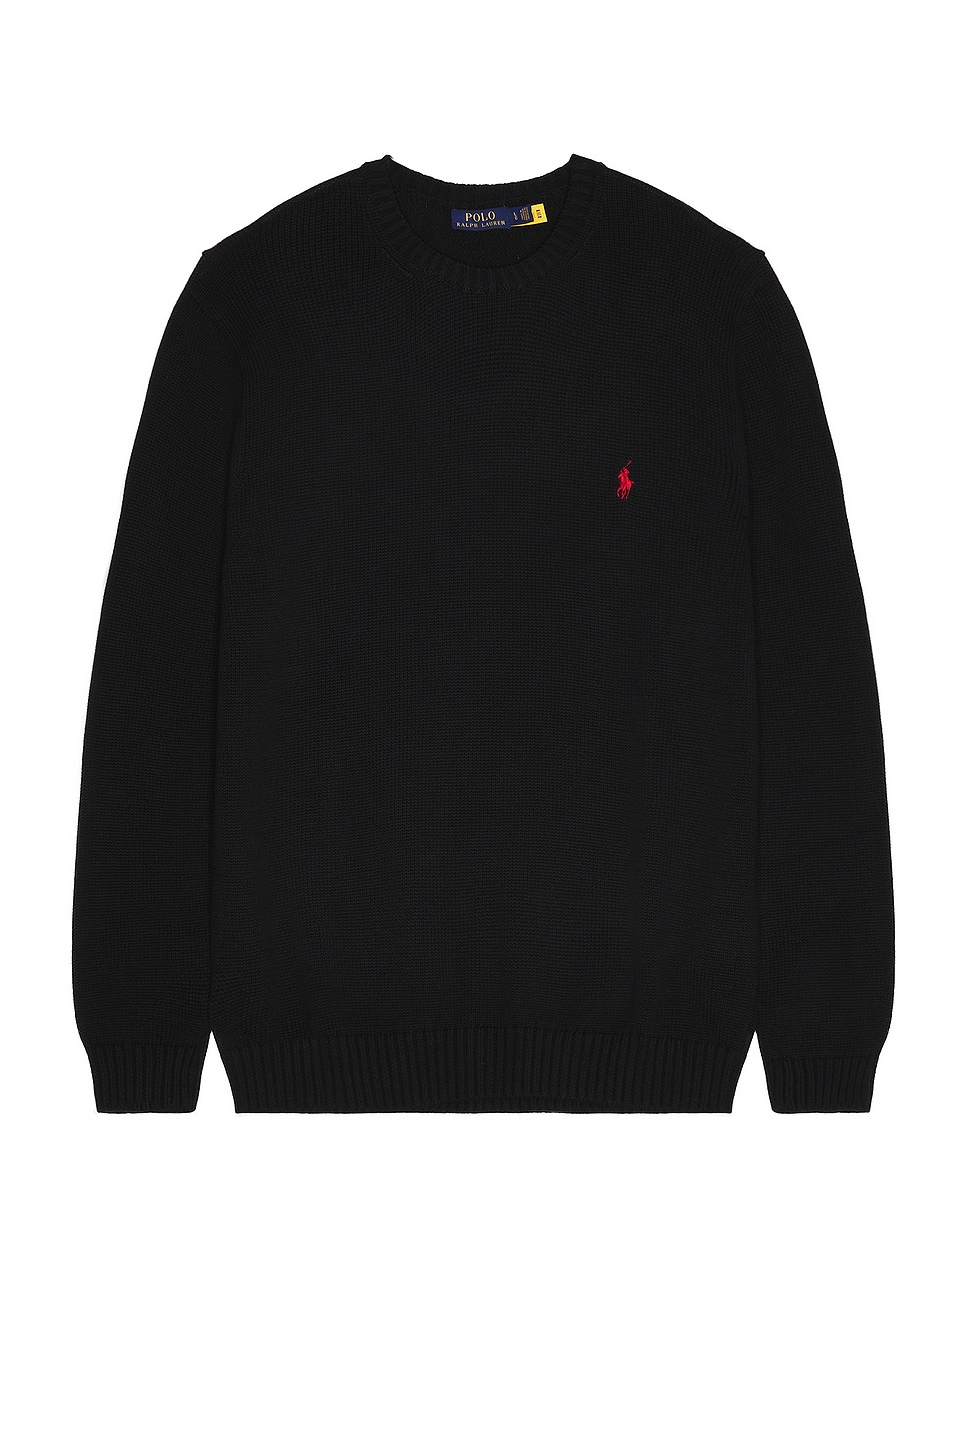 Image 1 of Polo Ralph Lauren Pullover Sweater in Polo Black